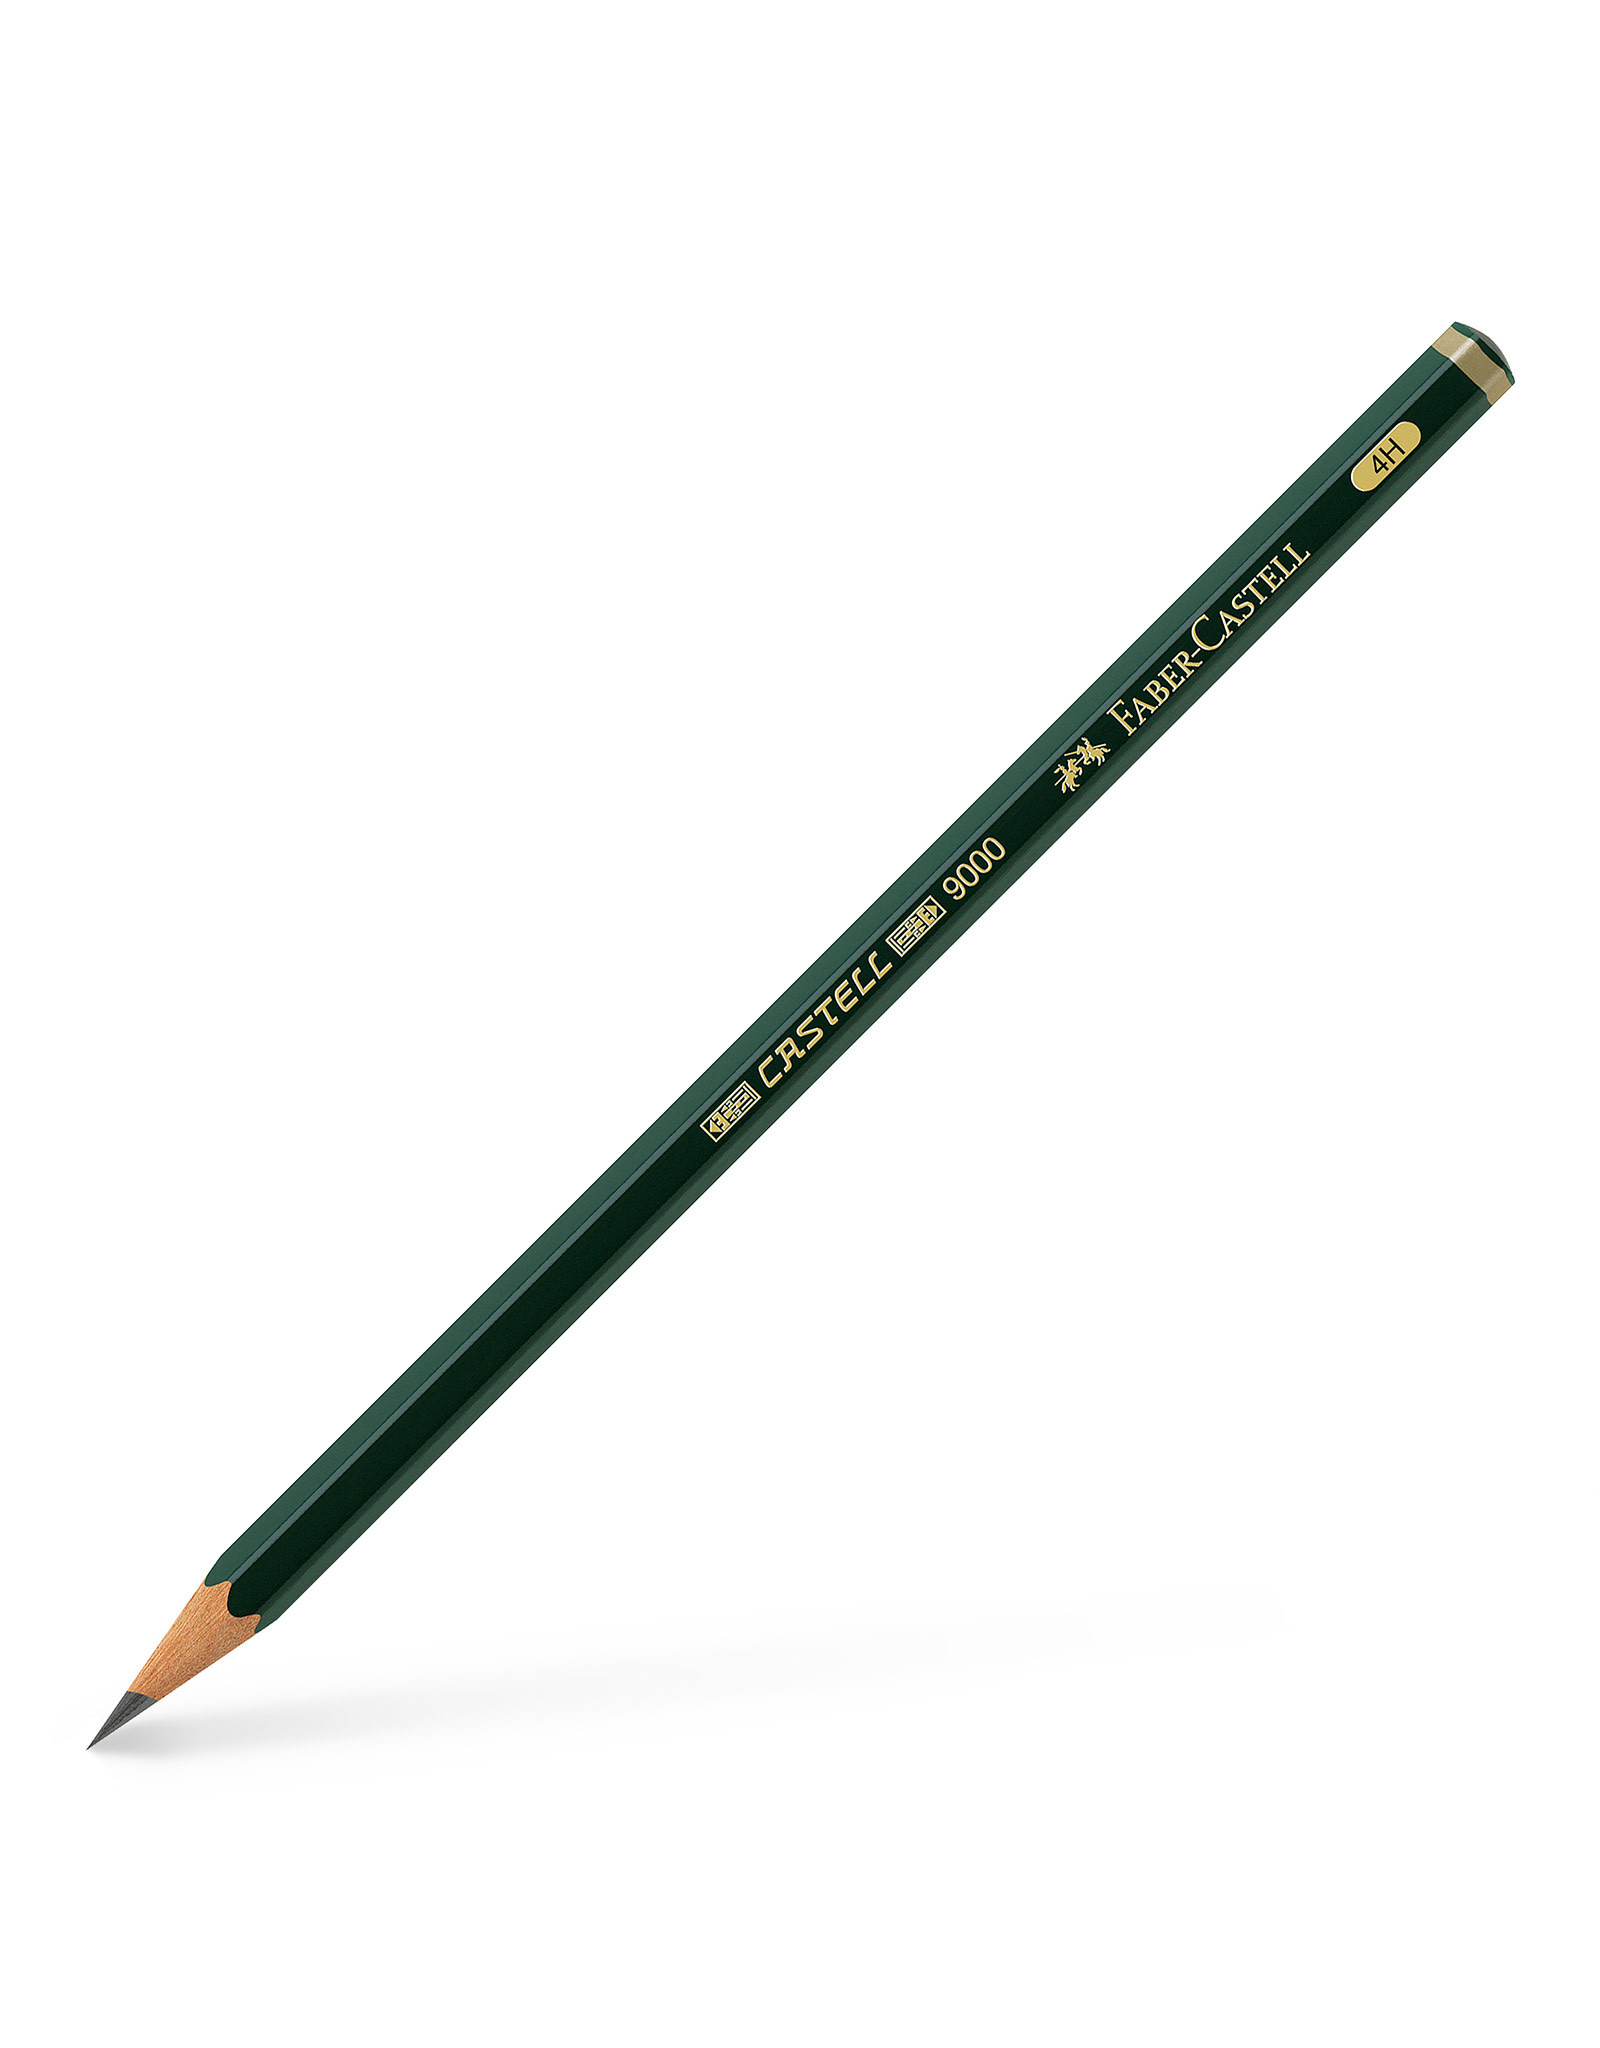 FABER-CASTELL Castell® 9000 Graphite Pencil, 4H